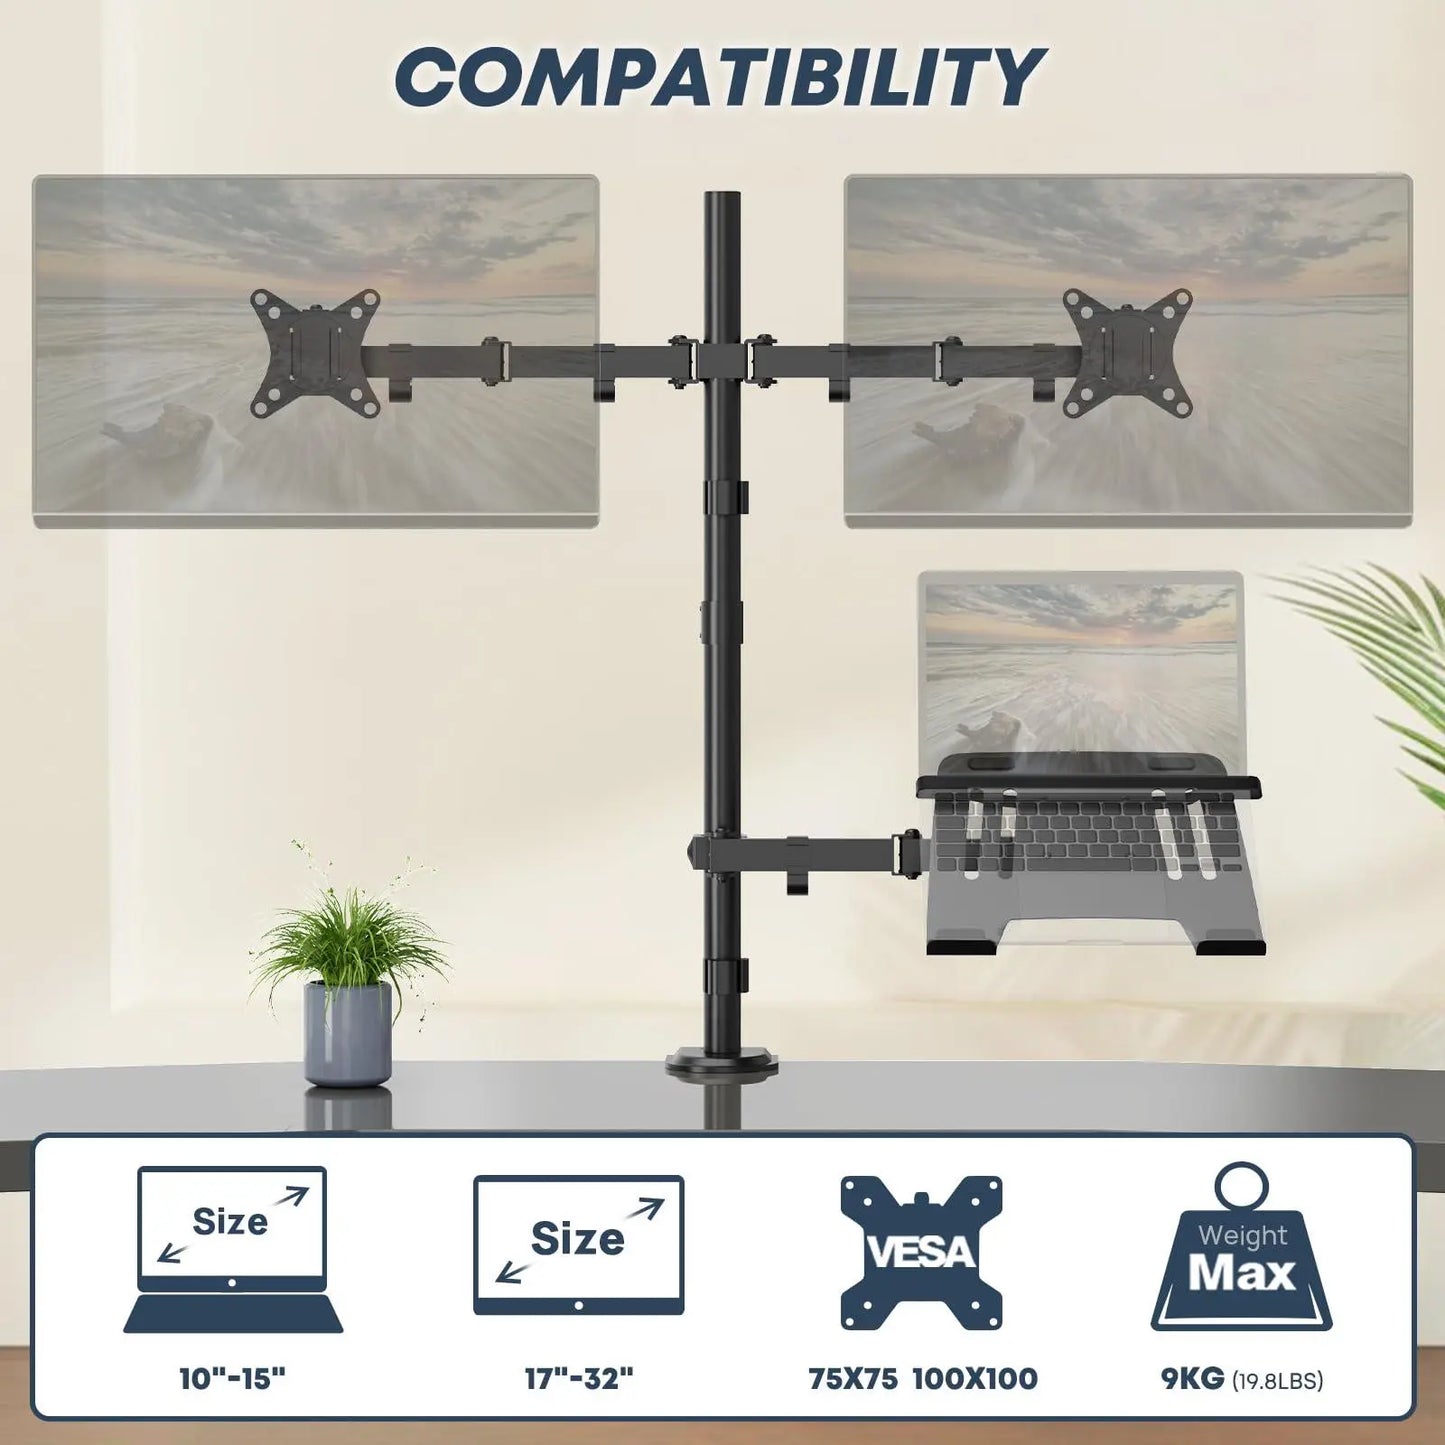 PUTORSEN  Dual Monitor Stand and Laptop Mount Fit Two 17 to 32 Inch Monitor and 10 to 15 Inch Laptop,Extra Tall Adjustable Stand,19.8 lbs Weight Capacity per Arm,Black PUTORSEN